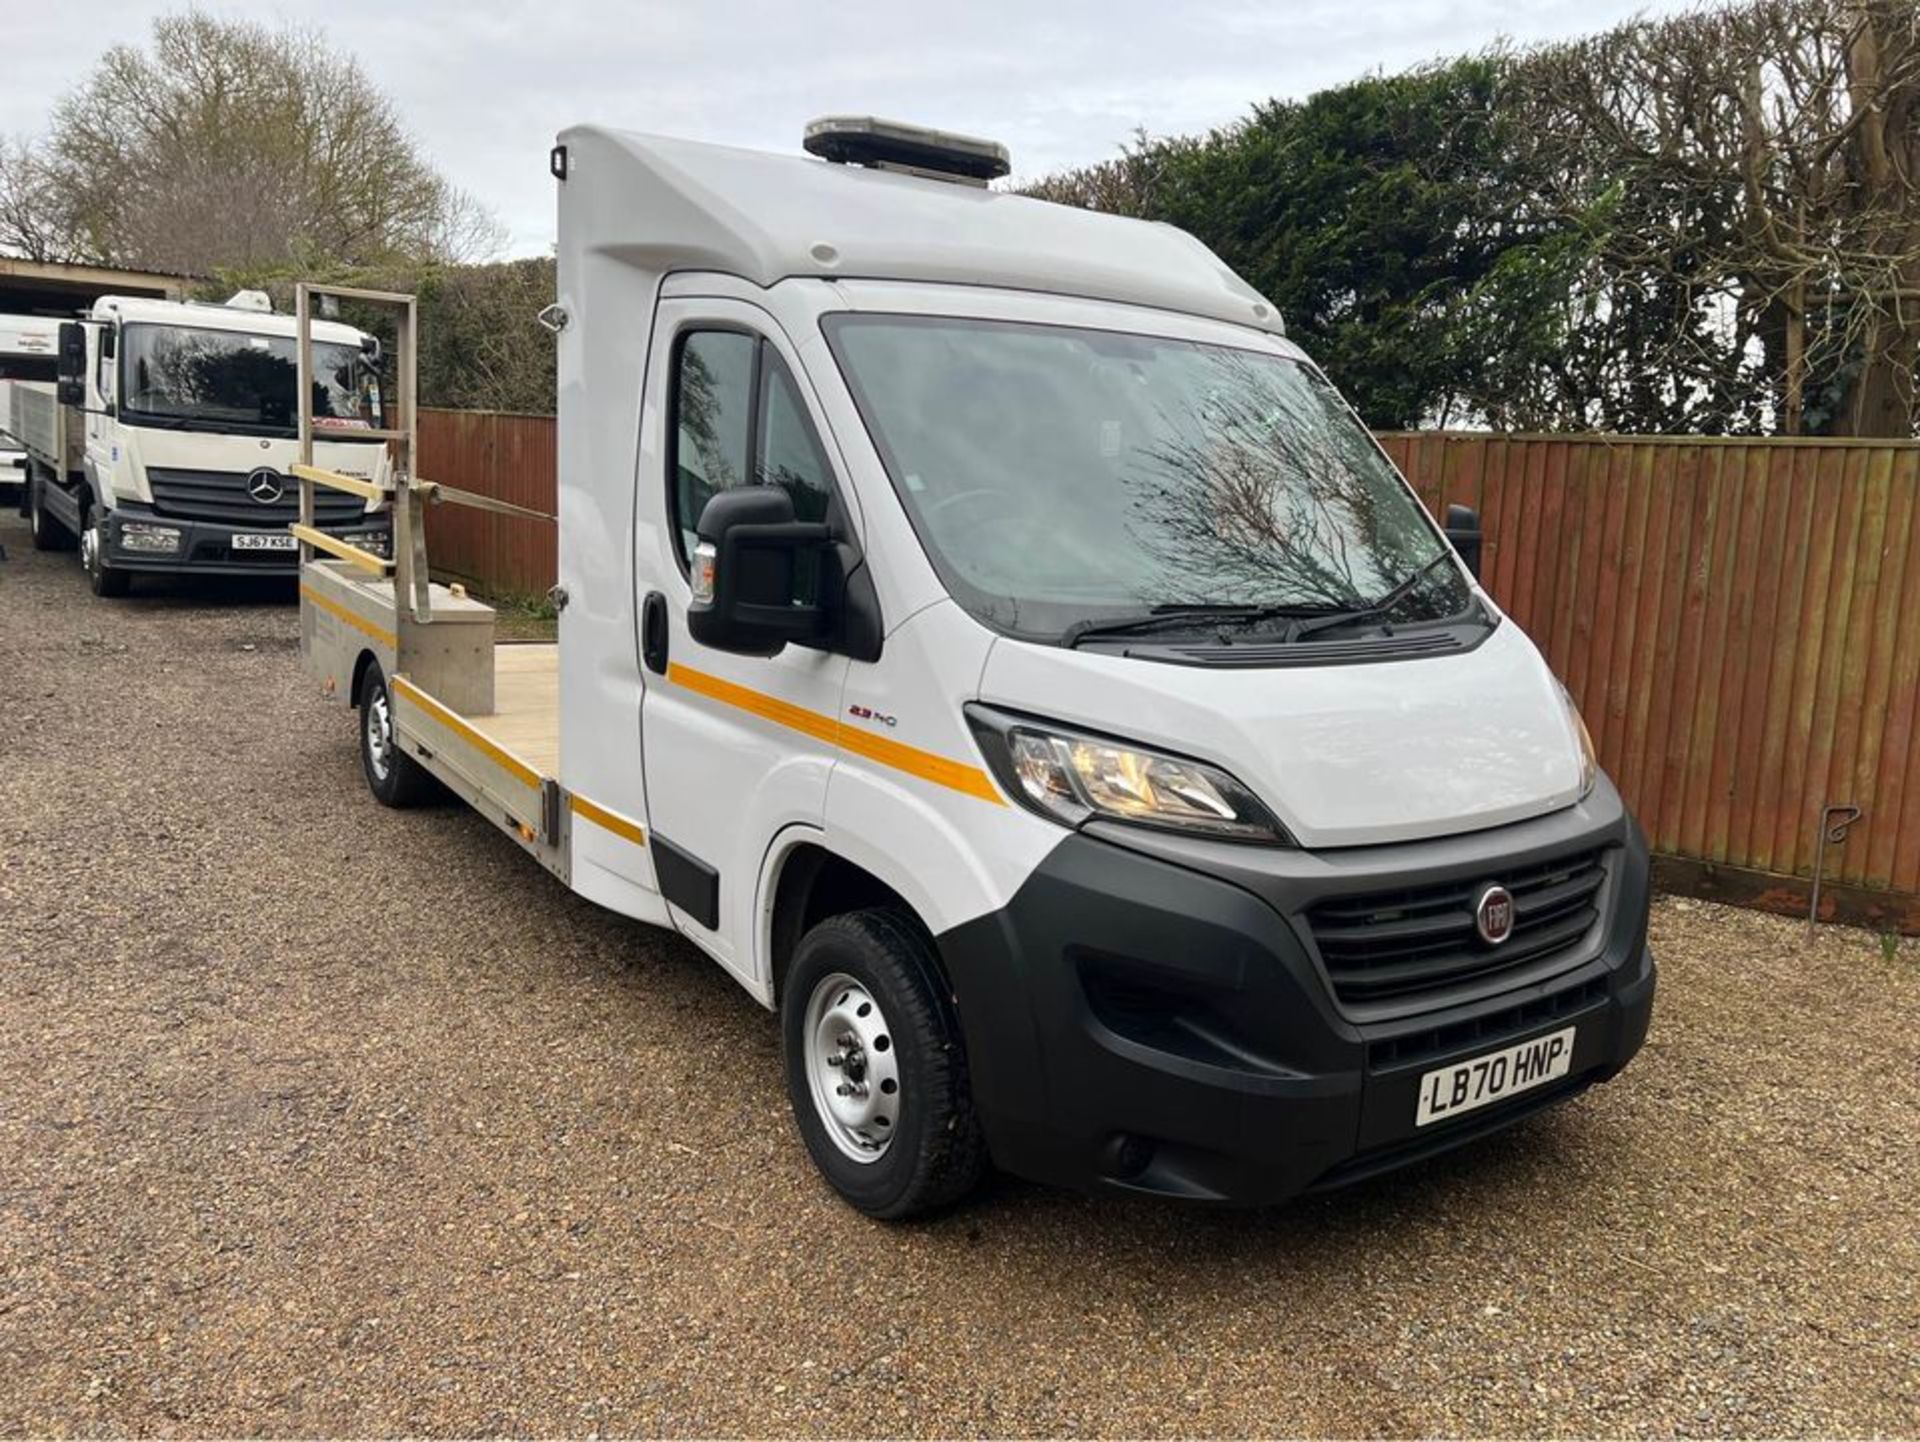 2021, FIAT Ducato 2.3 TD - Low Load Dropside (Traffic Management Truck) - Image 2 of 14